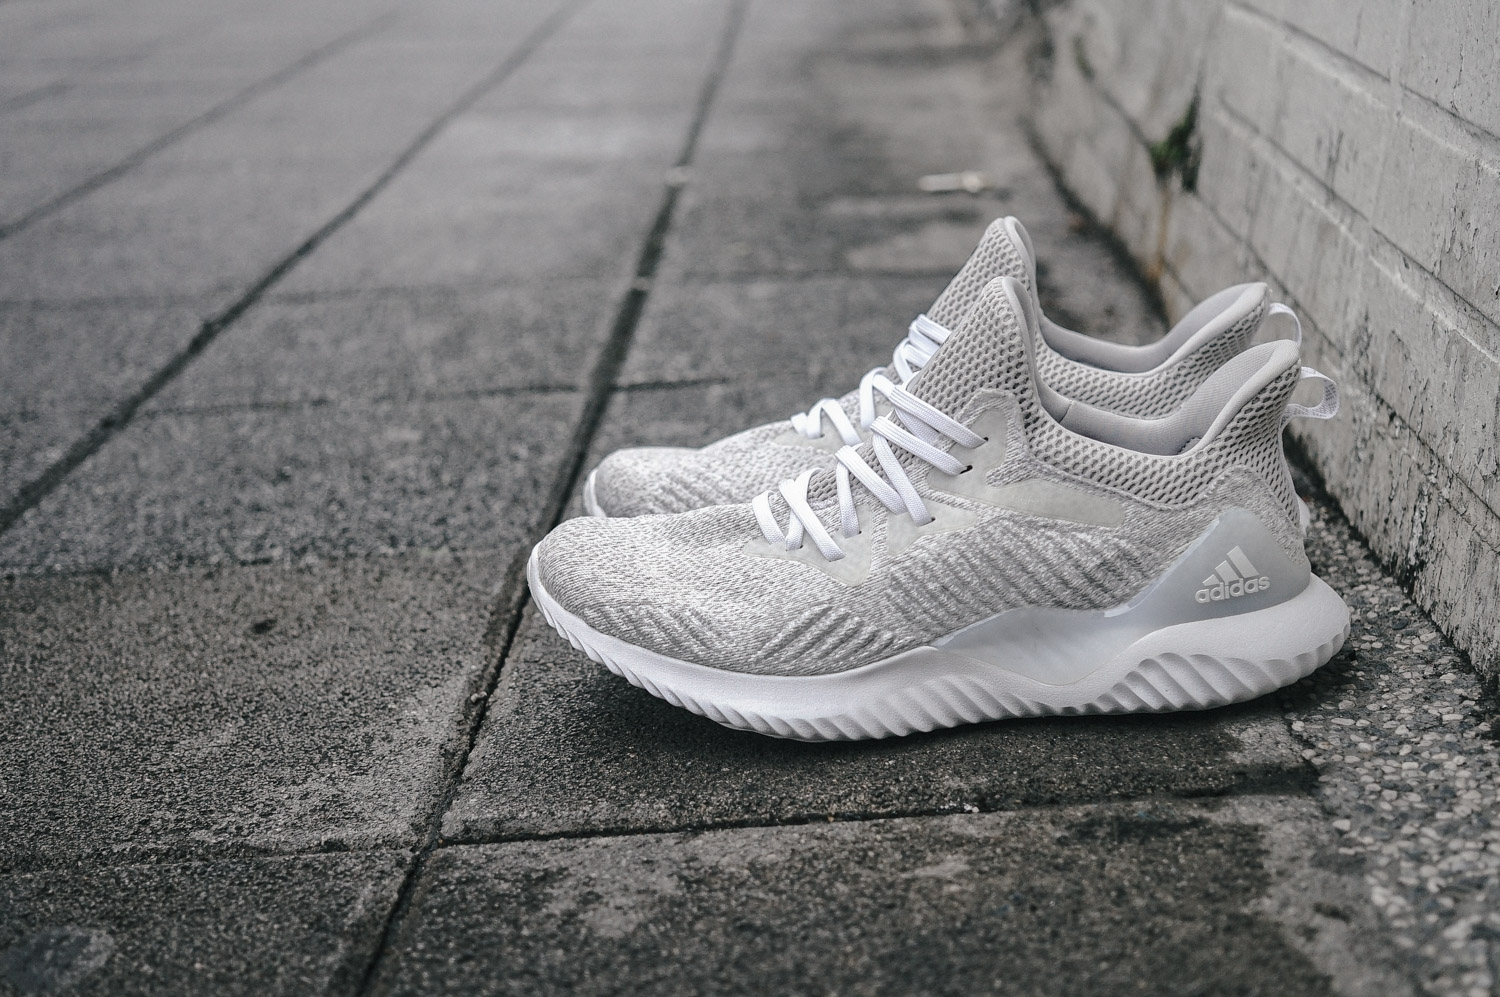 Reigning Champ x adidas AlphaBOUNCE 